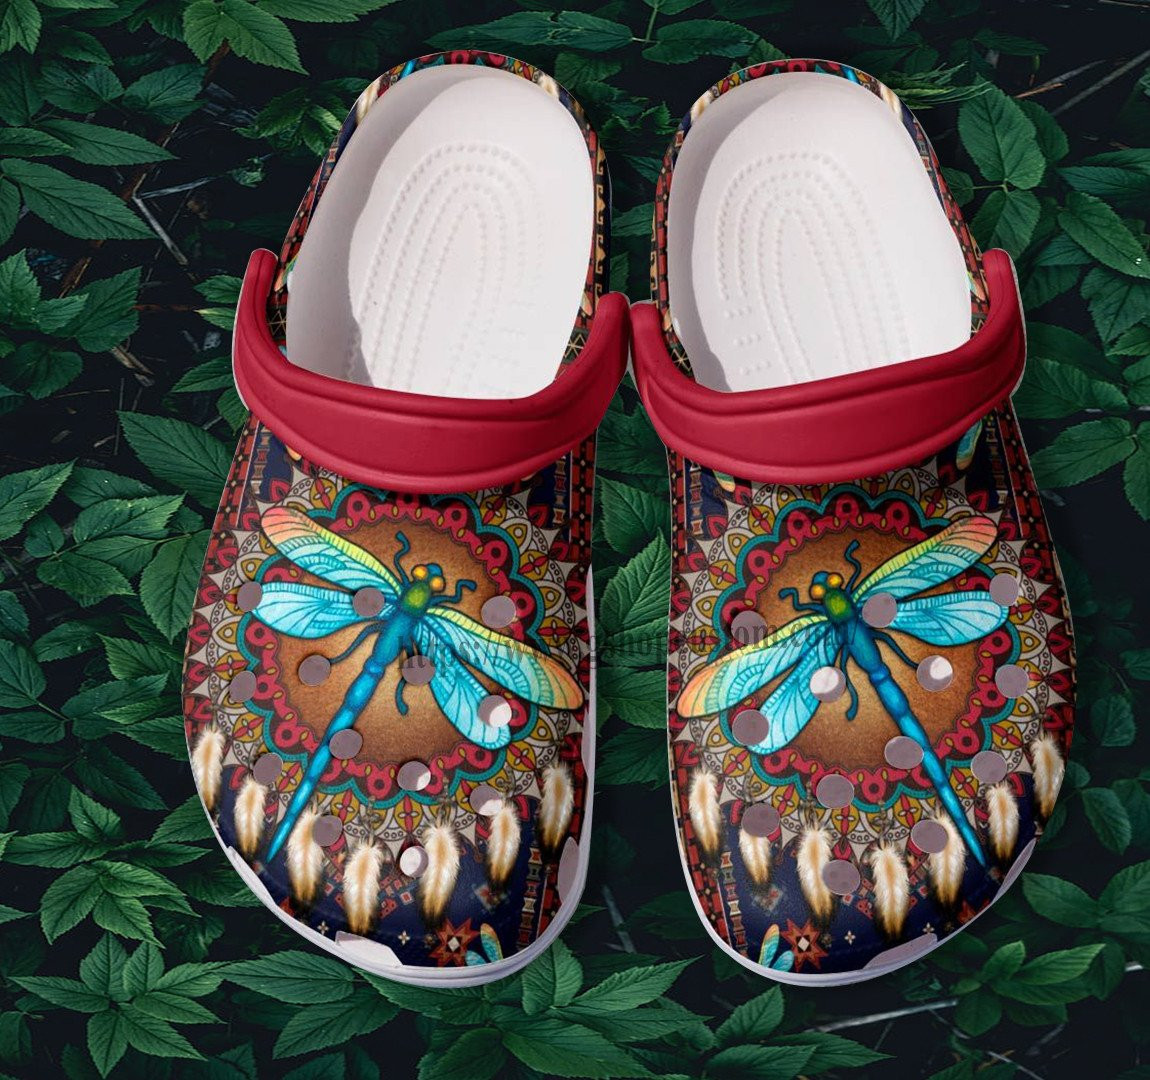 Dragonfly Native America Culture Crocs Shoes Gift Grandma Daughter - Dragonfly Boho Clogs Gift Women Mother Day